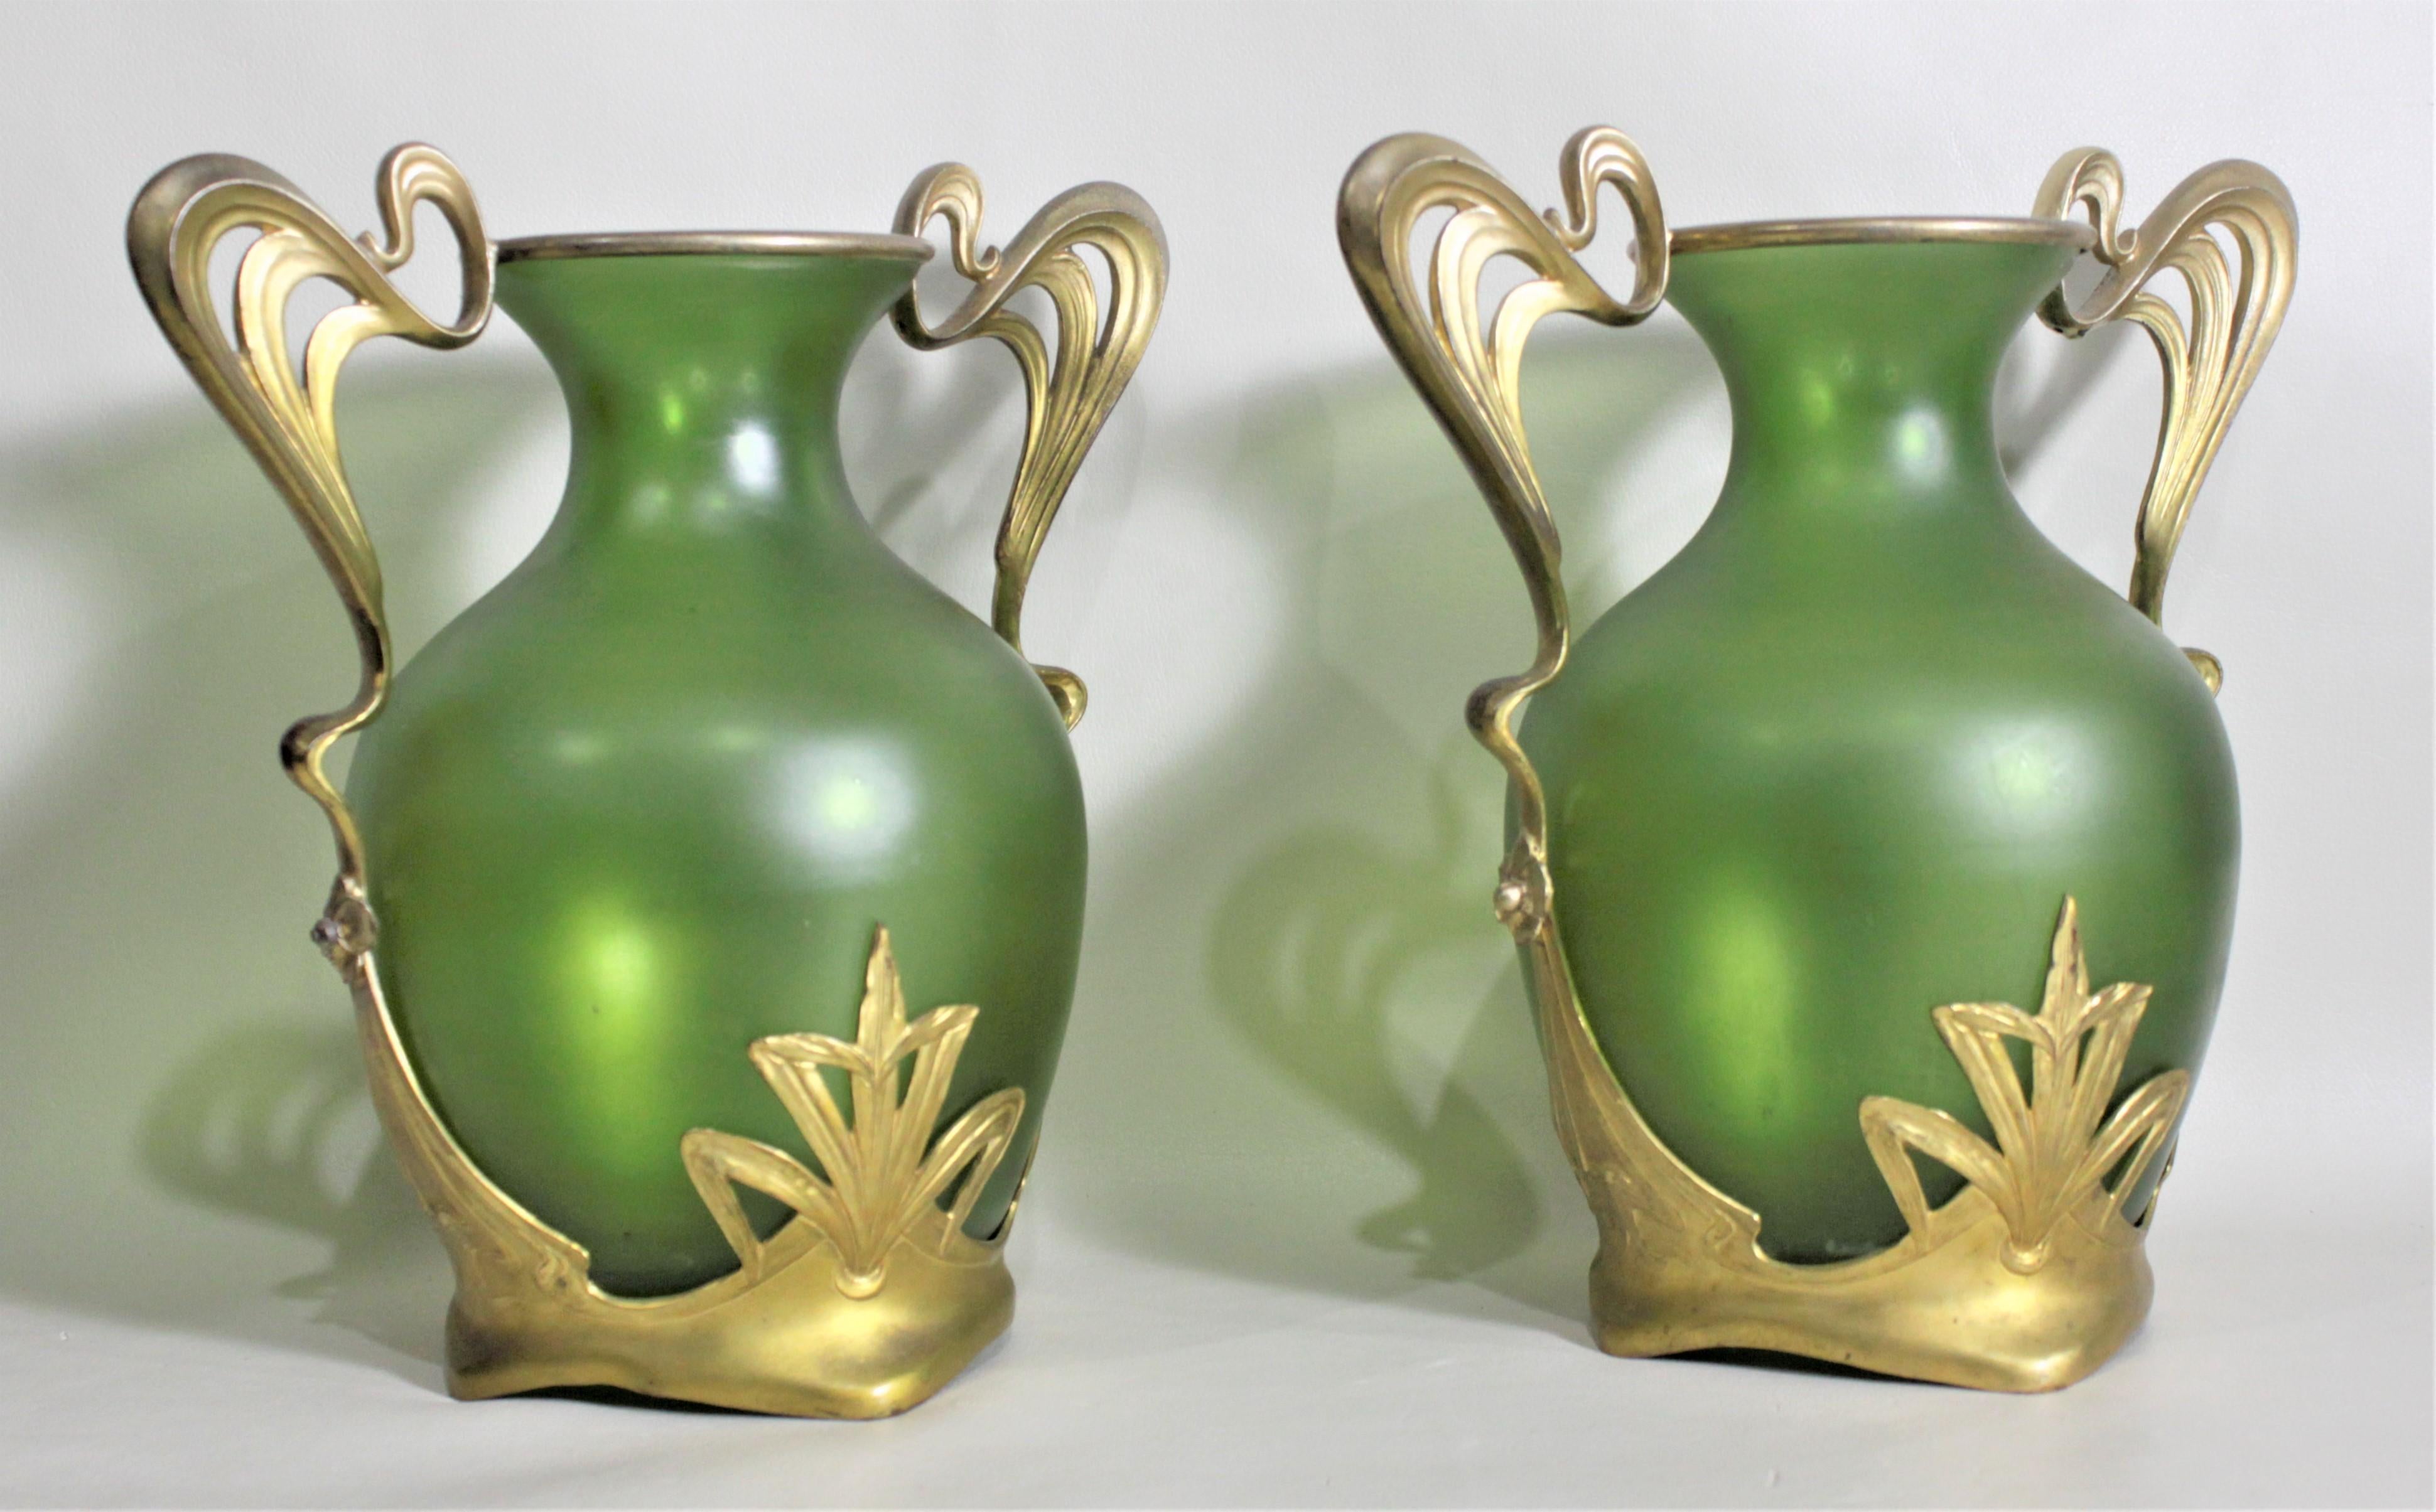 This pair of antique deep green art glass vases with gilt metal mounts are unsigned but presumed to have been made in Austria in circa 1900 in the period Art Nouveau style. The vases are done in a deep rich green which are framed by the bright gold